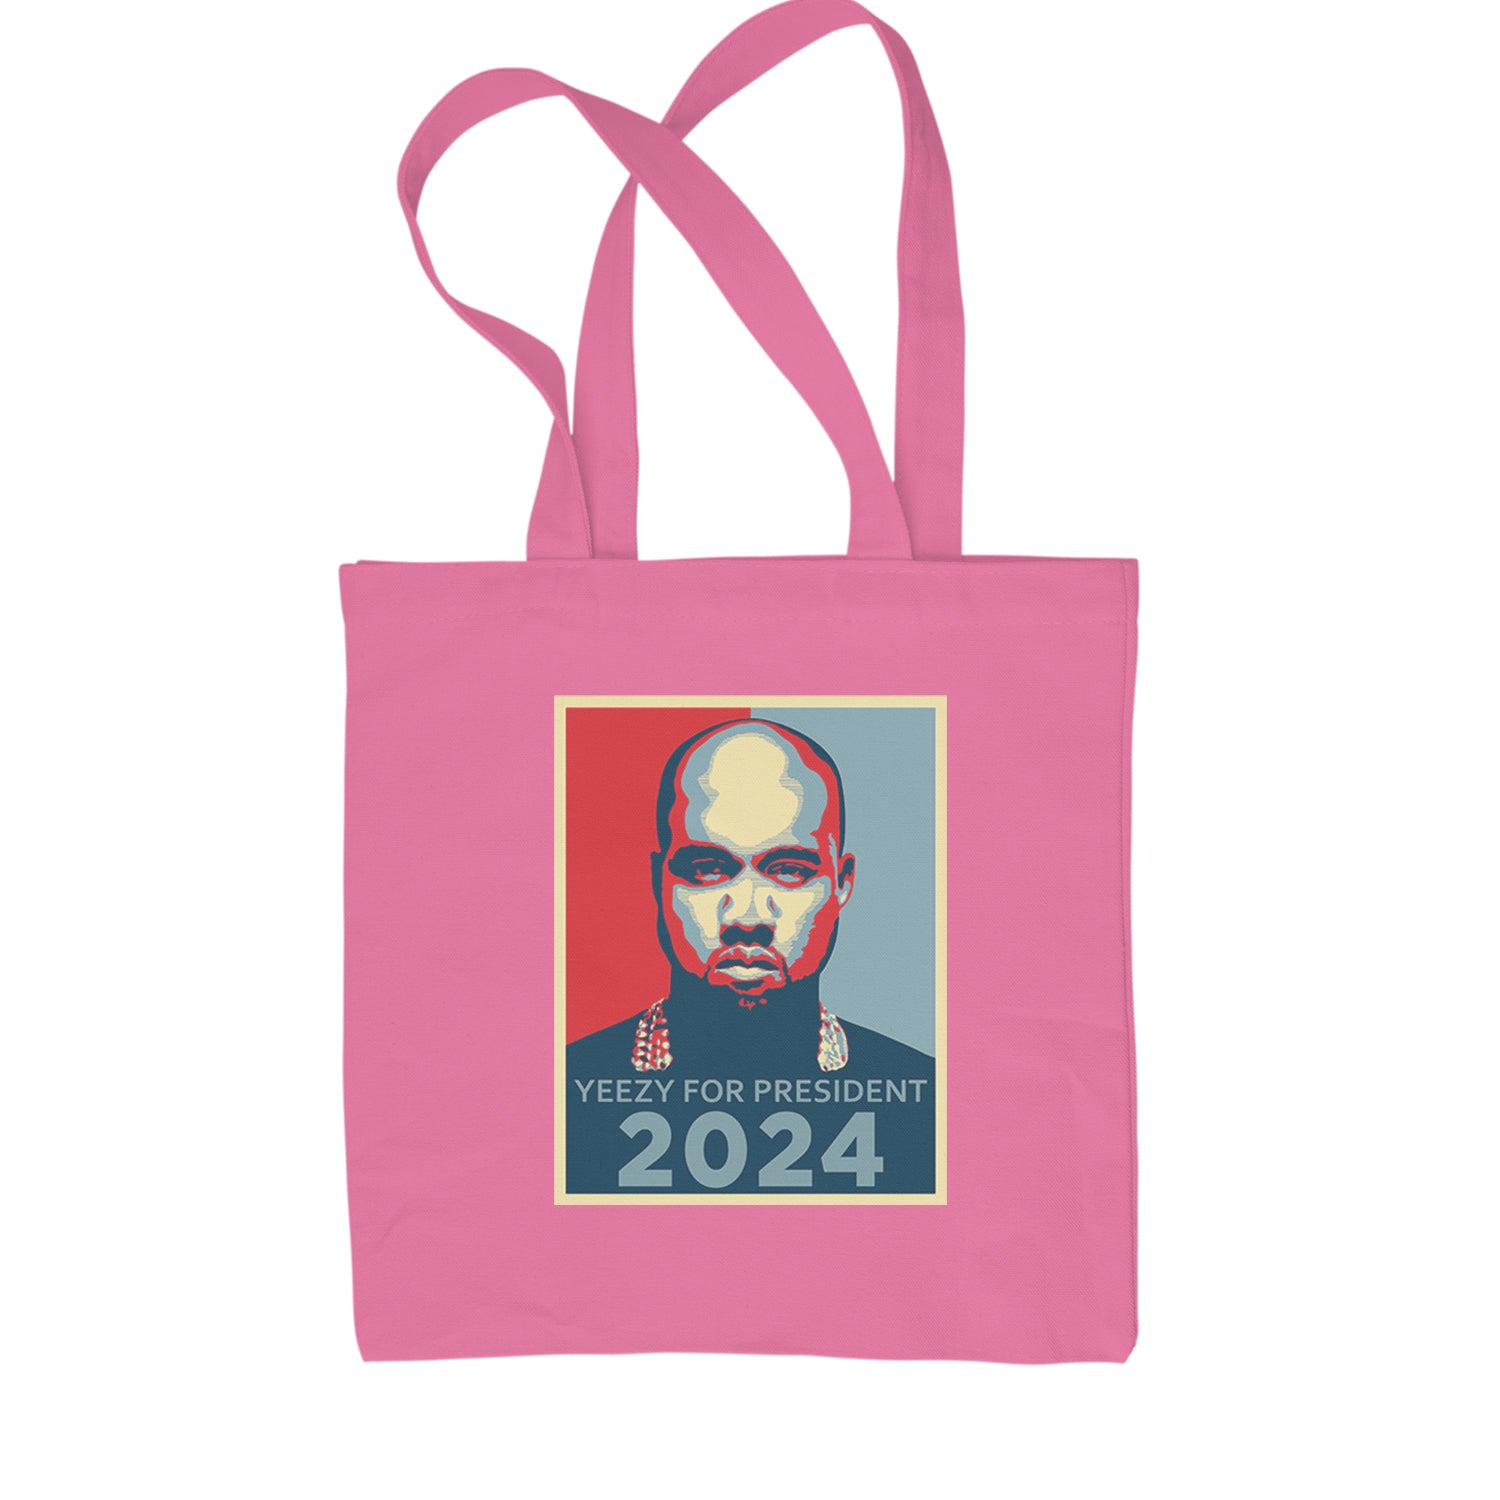 Yeezus For President Vote for Ye Shopping Tote Bag Pink